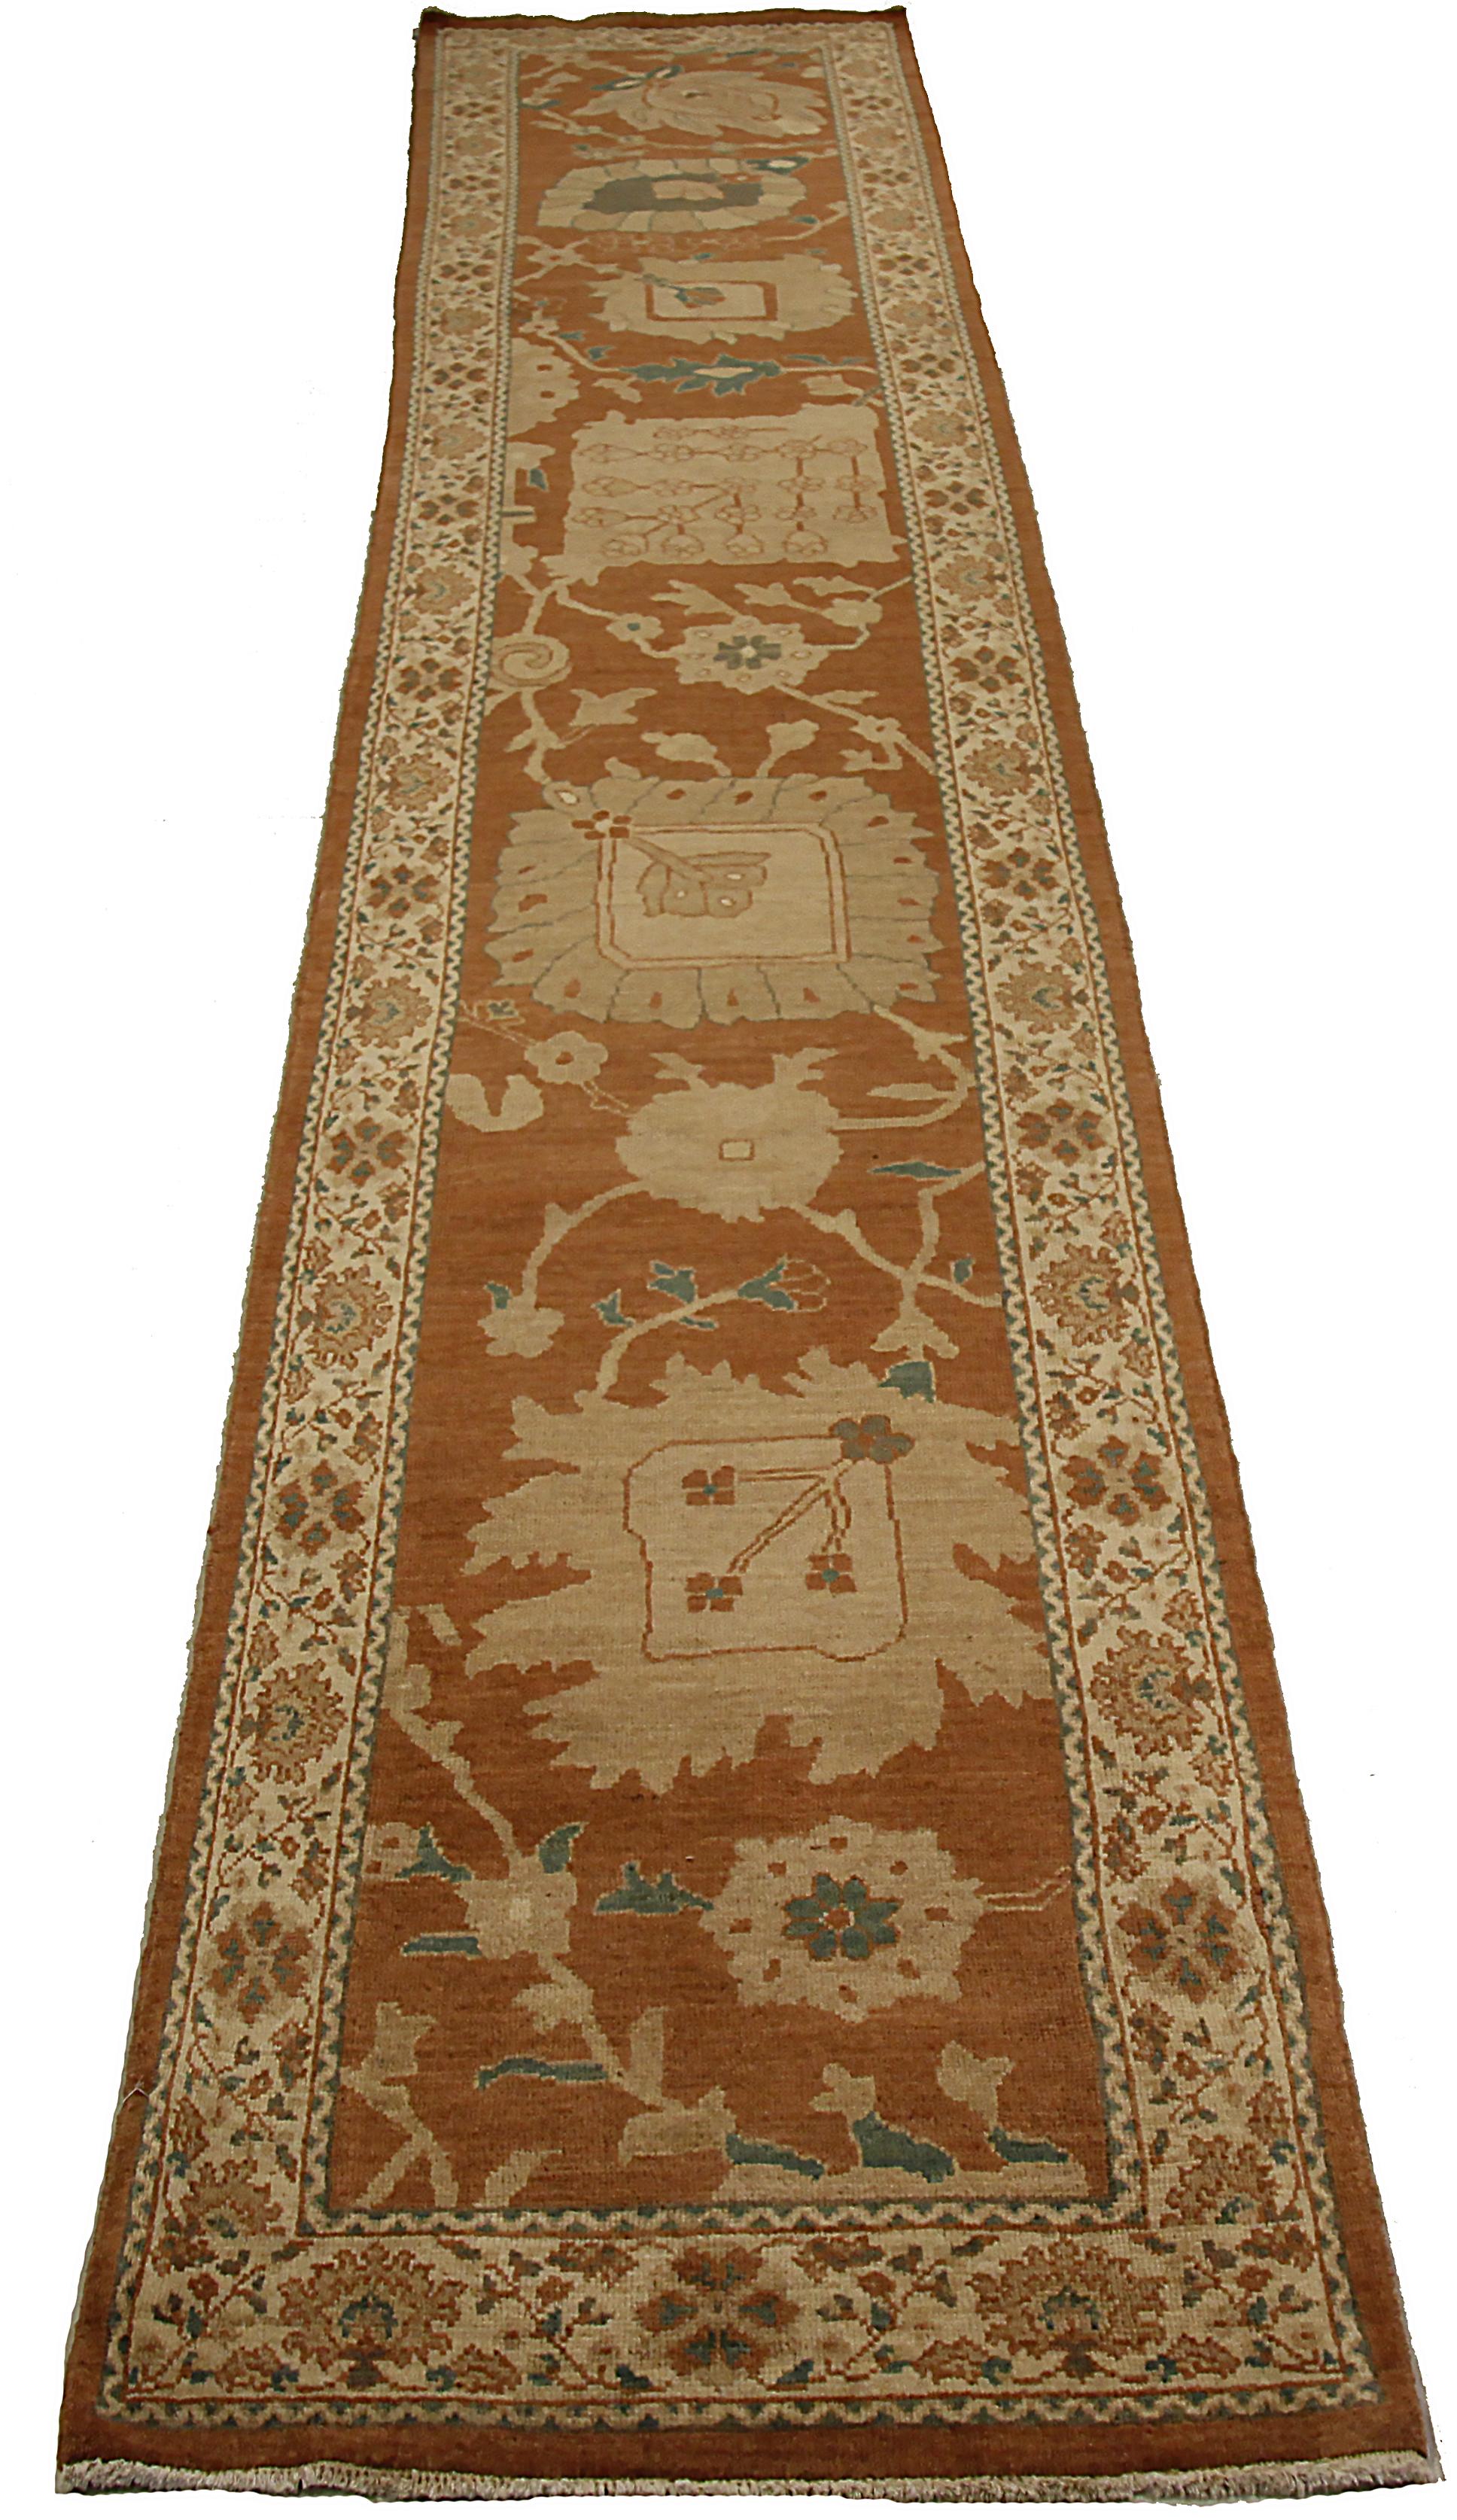 Antique Turkish runner rug from high quality sheep’s wool and colored with eco-friendly vegetable dyes that are proven safe for humans and pets alike. It’s a classic Sultanabad design showcasing a regal brown field with prominent Herati flower heads